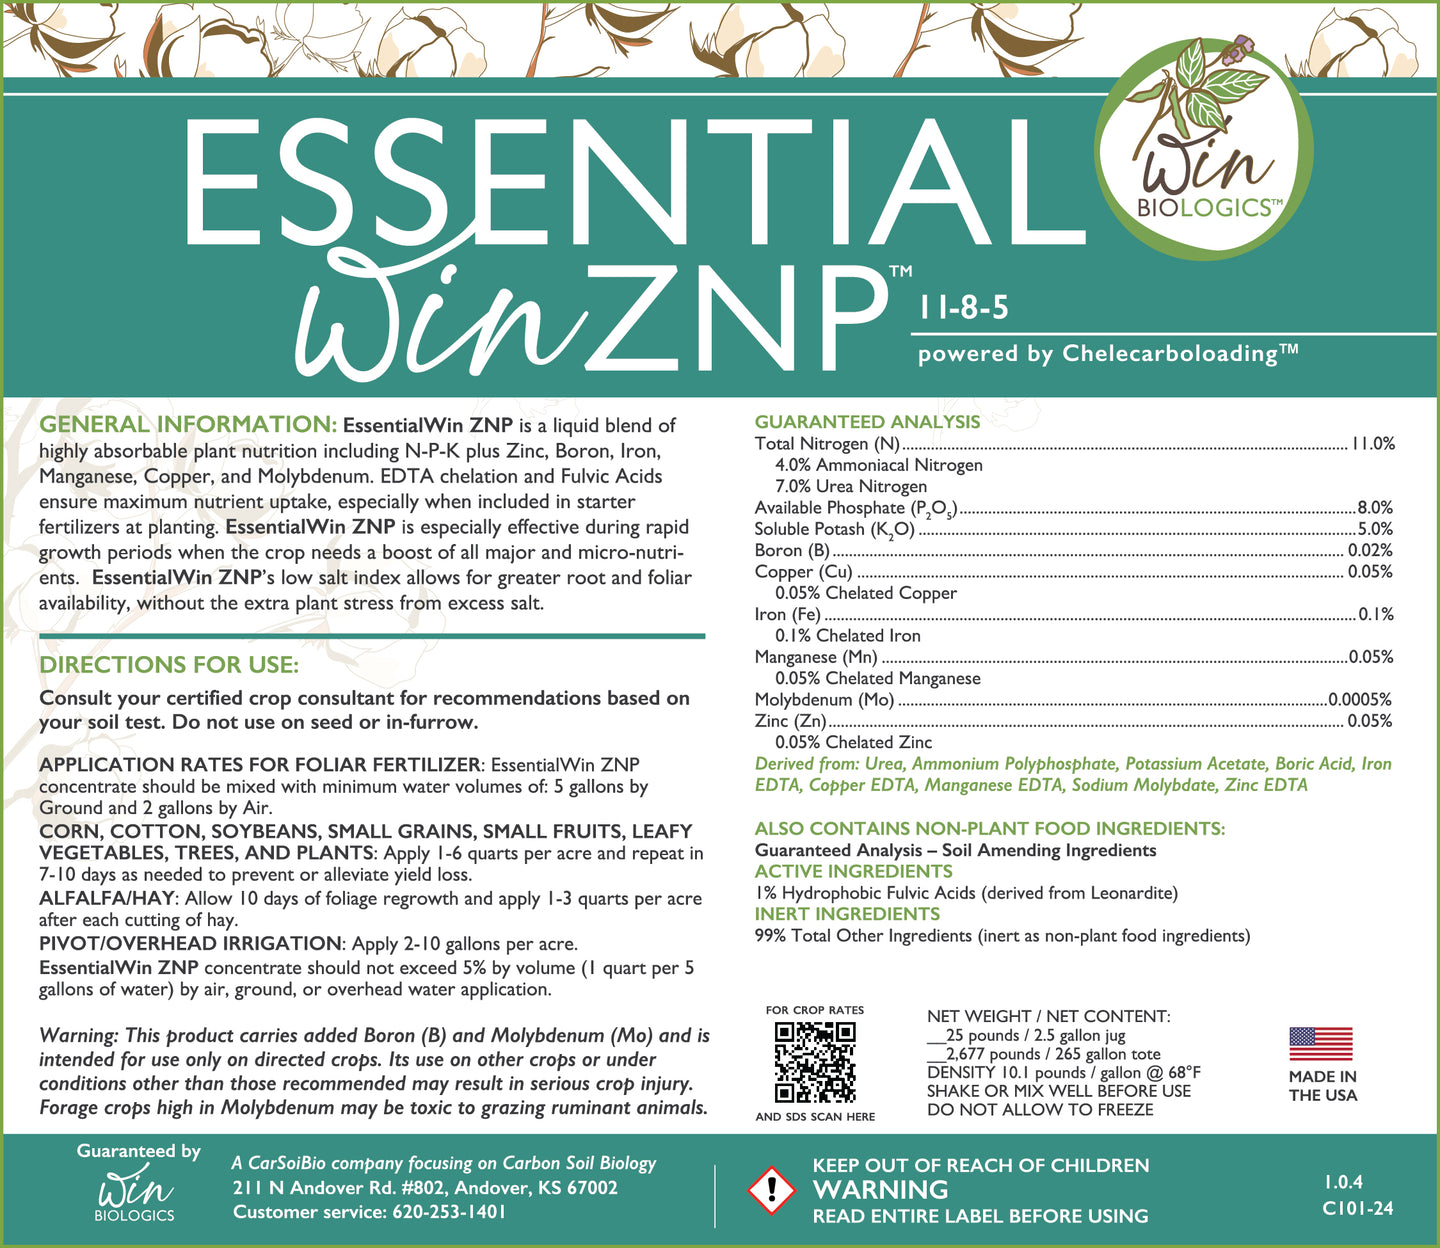 Essential WIN ZNP